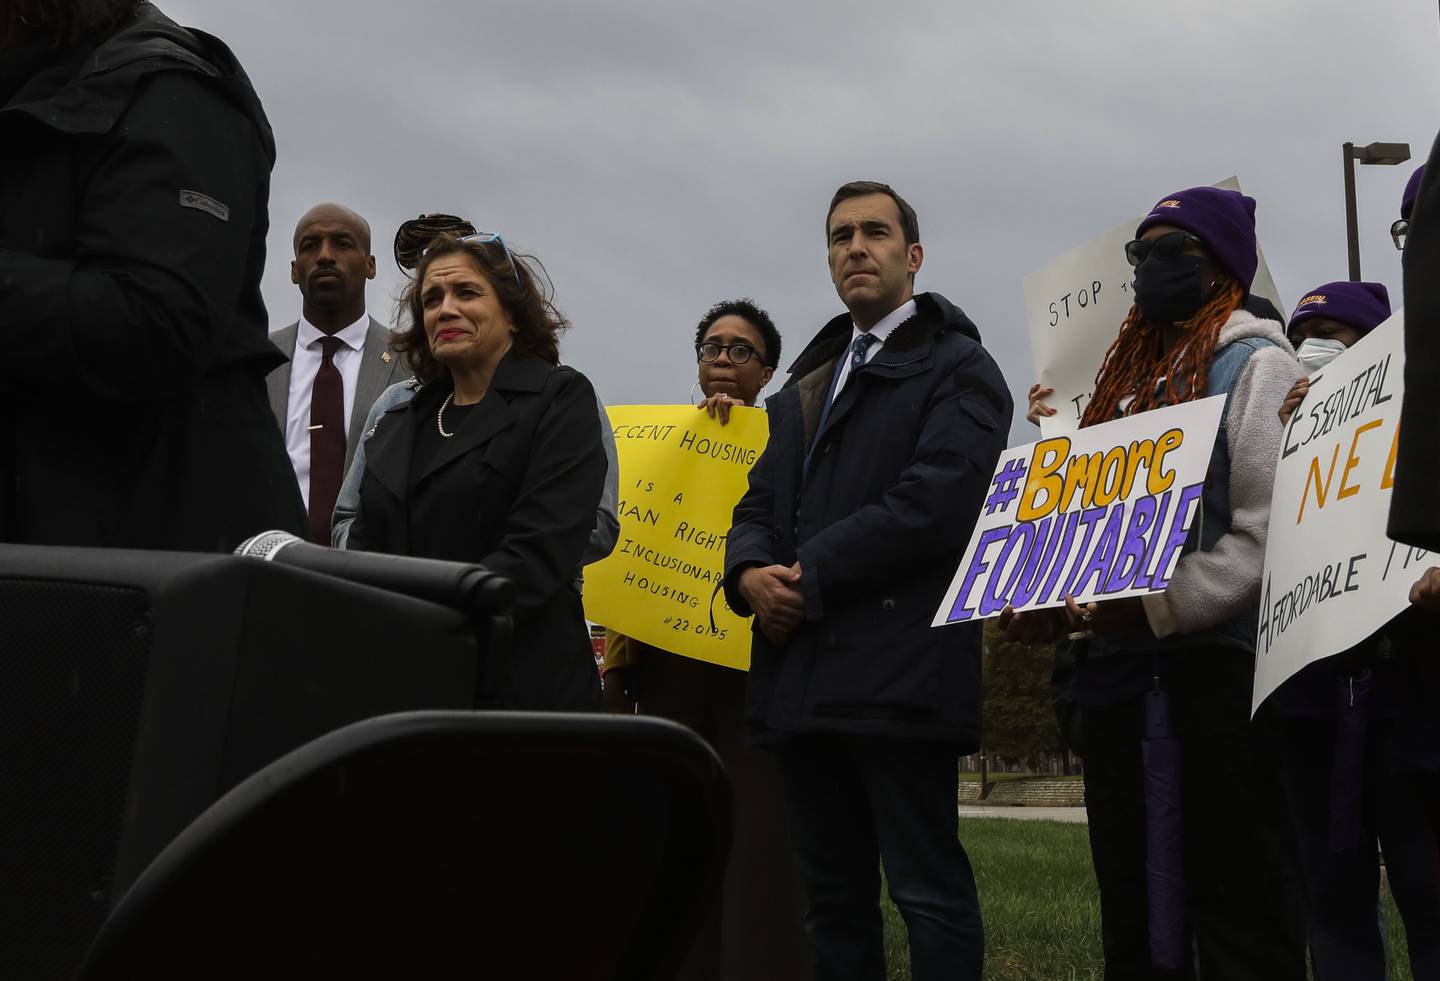 Council members Odette Ramos, left, and Zeke Cohen, right, attend the rally. A rally in support of the BMOREEquitable Council Bill 22-0195, which demands equitable and affordable housing options for all, took place outside of 401 Light Street on October 3, 2022.